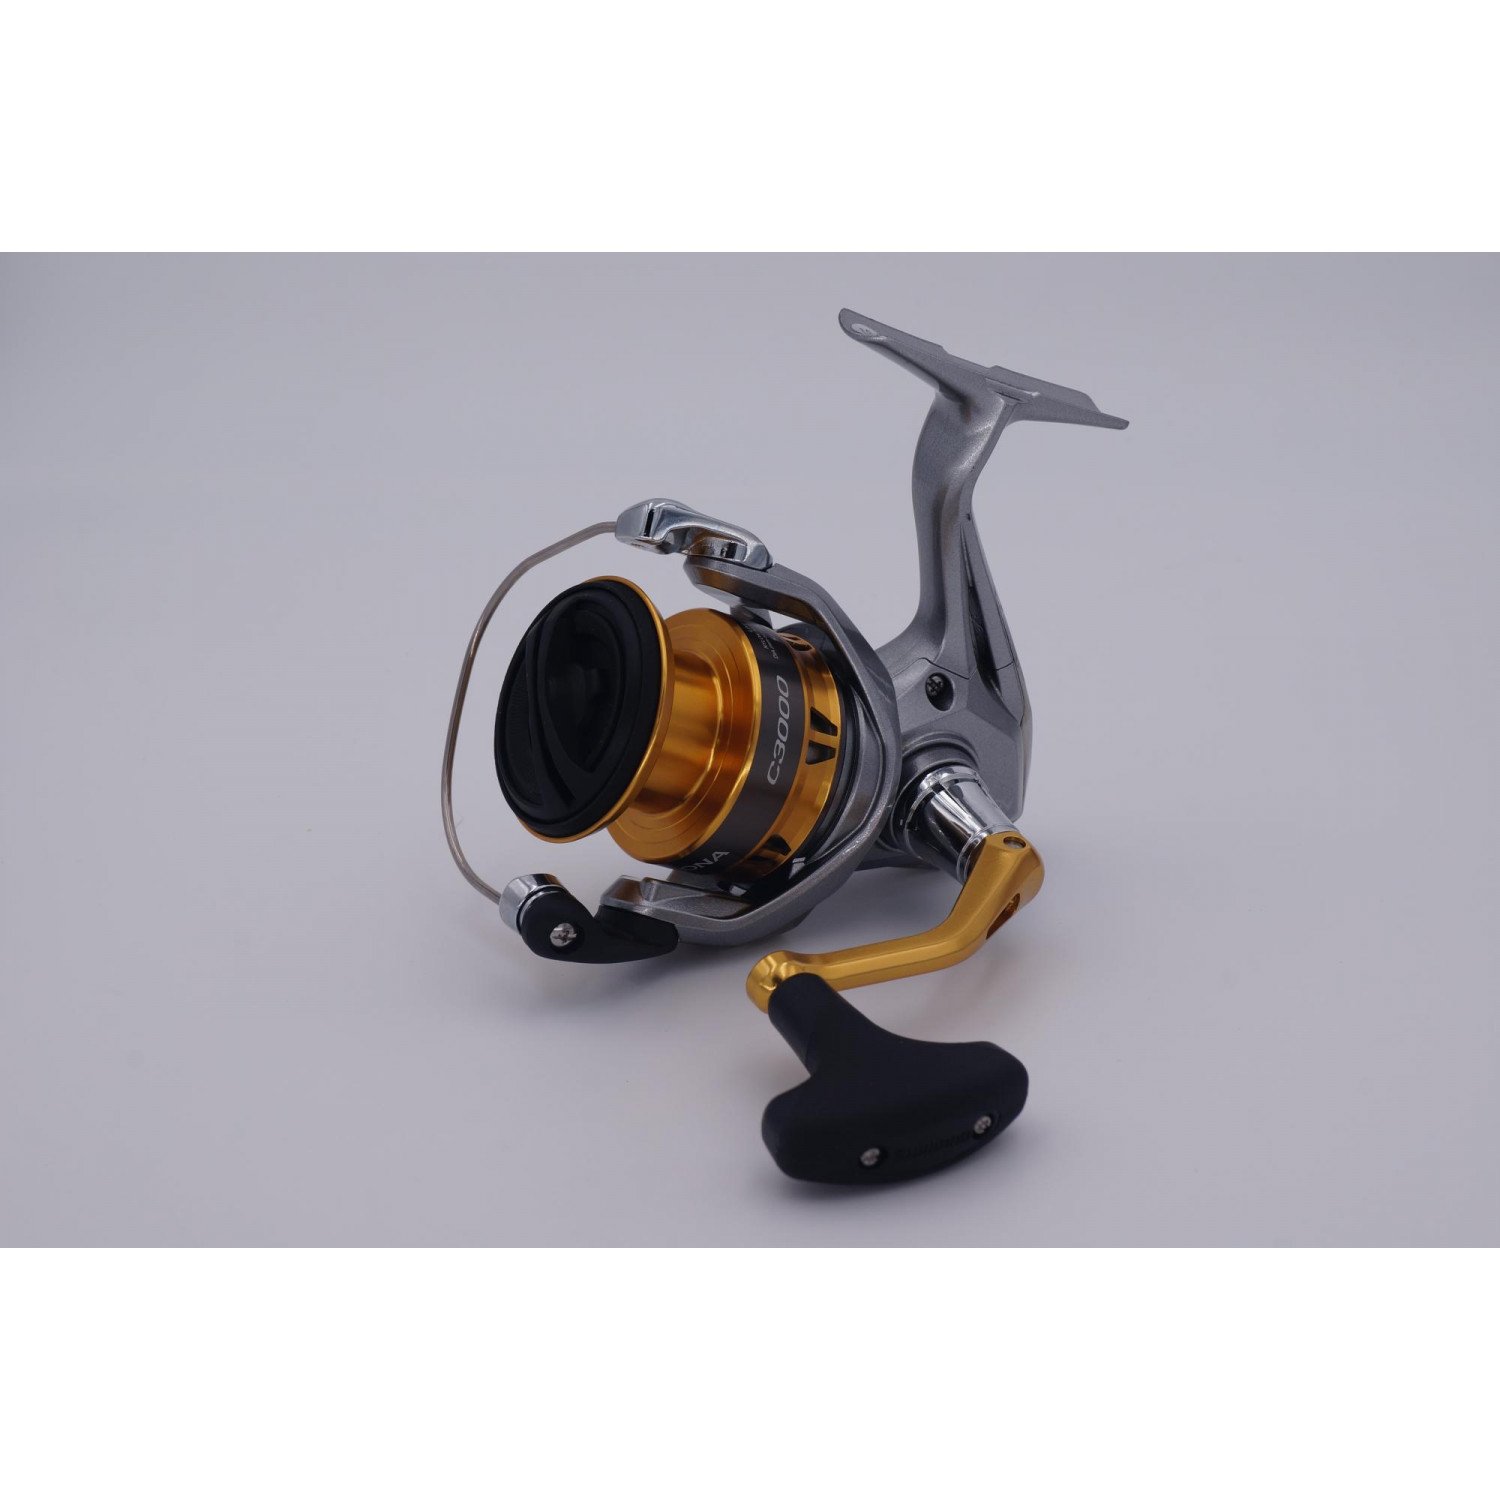 Shimano Sedona C3000 HG FI, Spinning reel with front drag, Signs